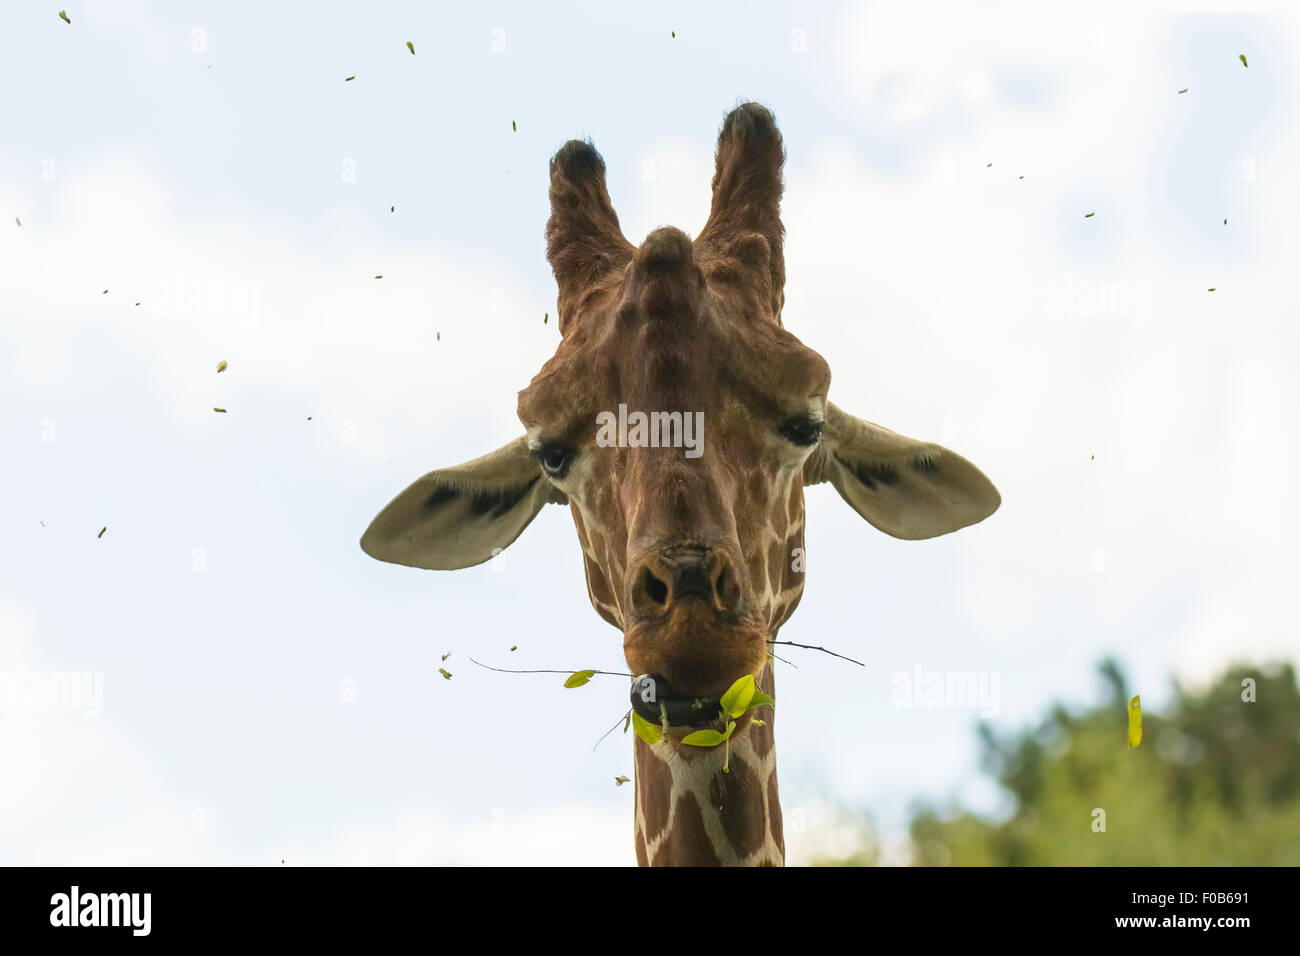 Closeup of a giraffe eating leaves from a tree, the leaves are falling around his head. The Giraffe pulls a funny face Stock Photo